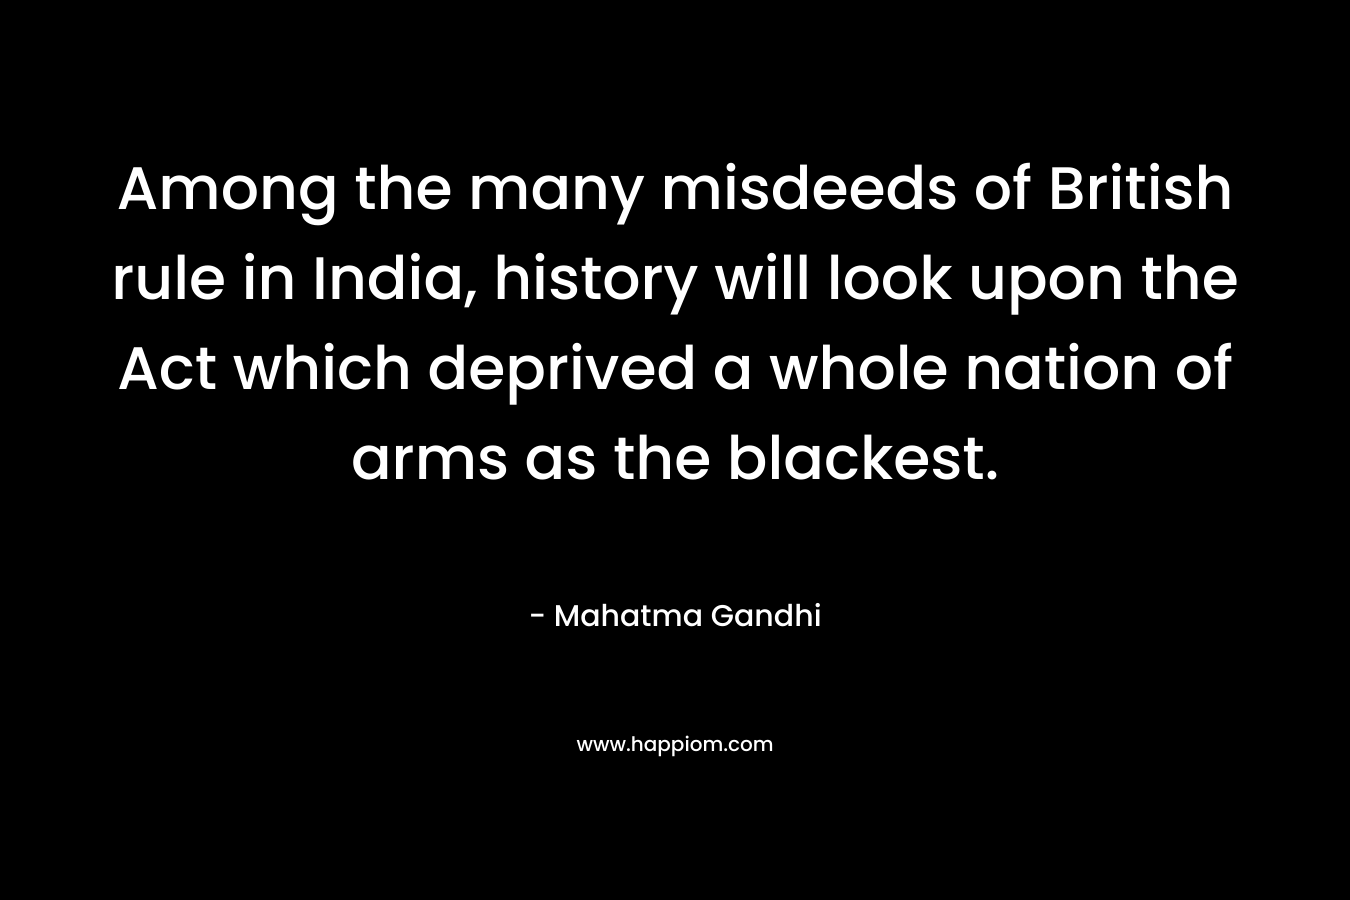 Among the many misdeeds of British rule in India, history will look upon the Act which deprived a whole nation of arms as the blackest. – Mahatma Gandhi